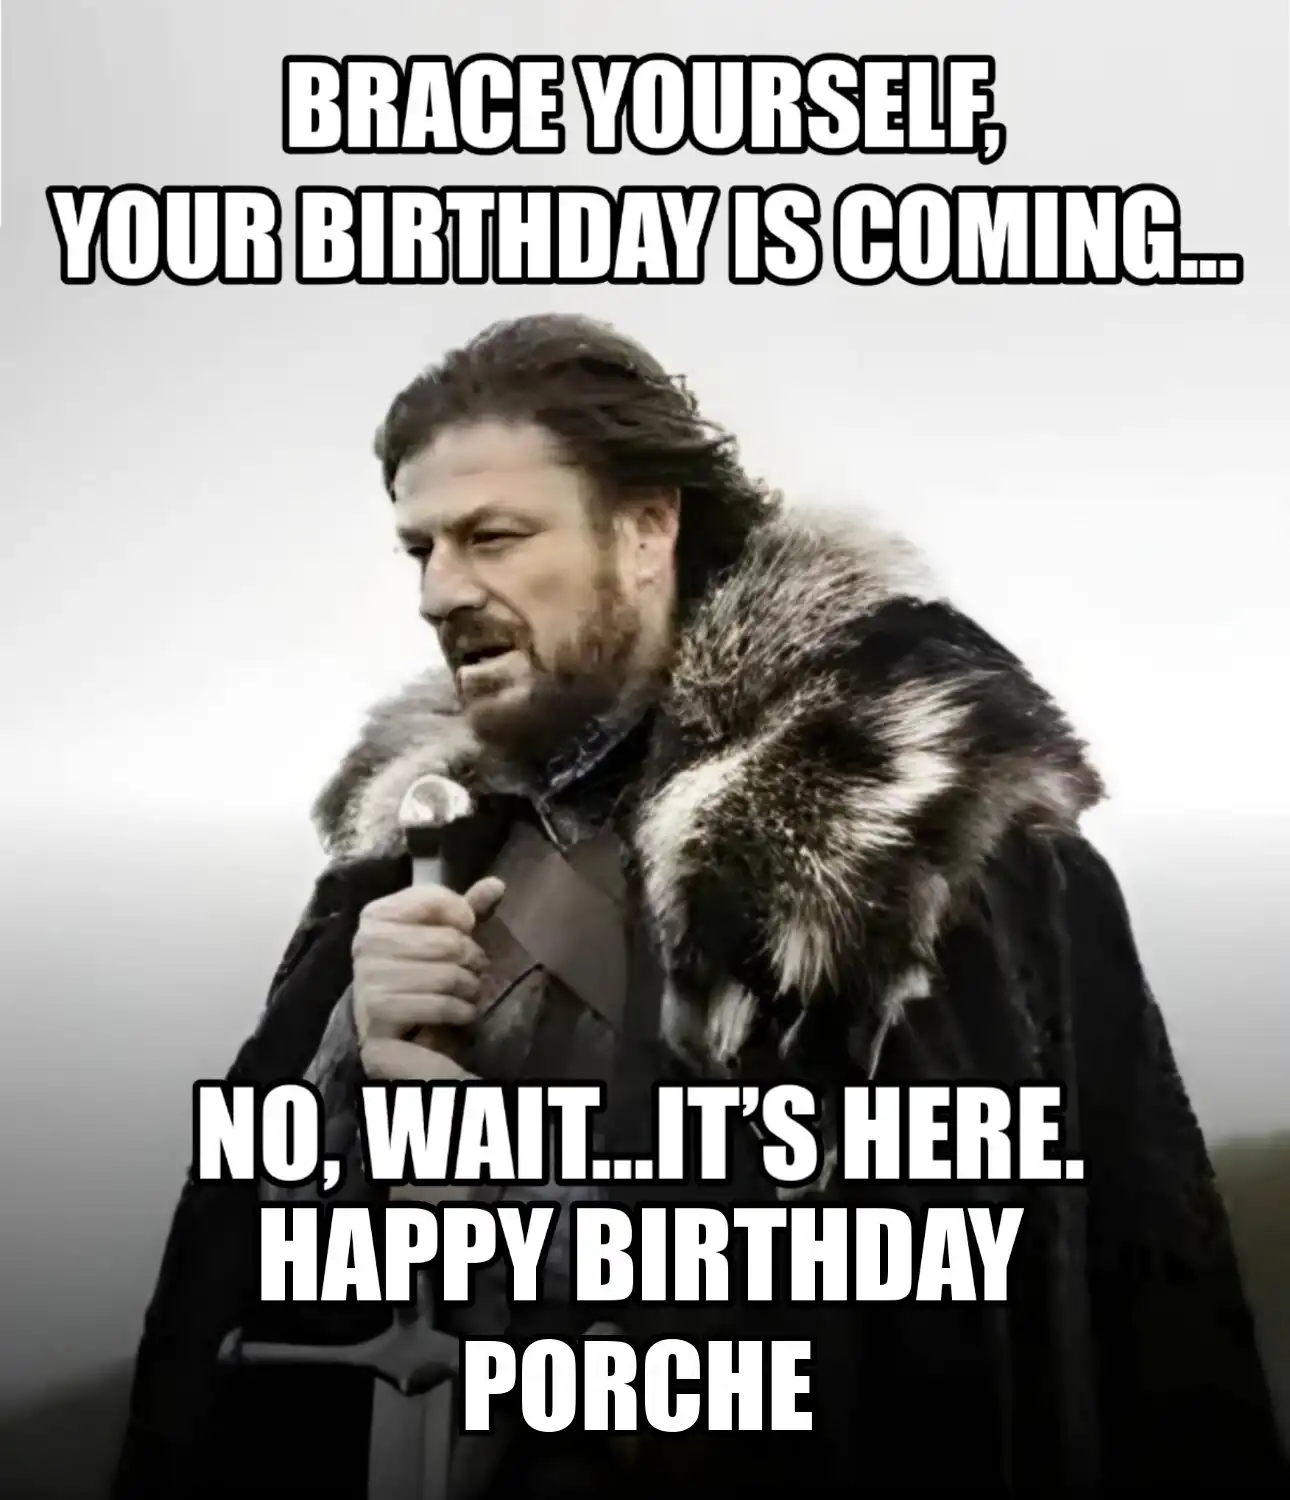 Happy Birthday Porche Brace Yourself Your Birthday Is Coming Meme